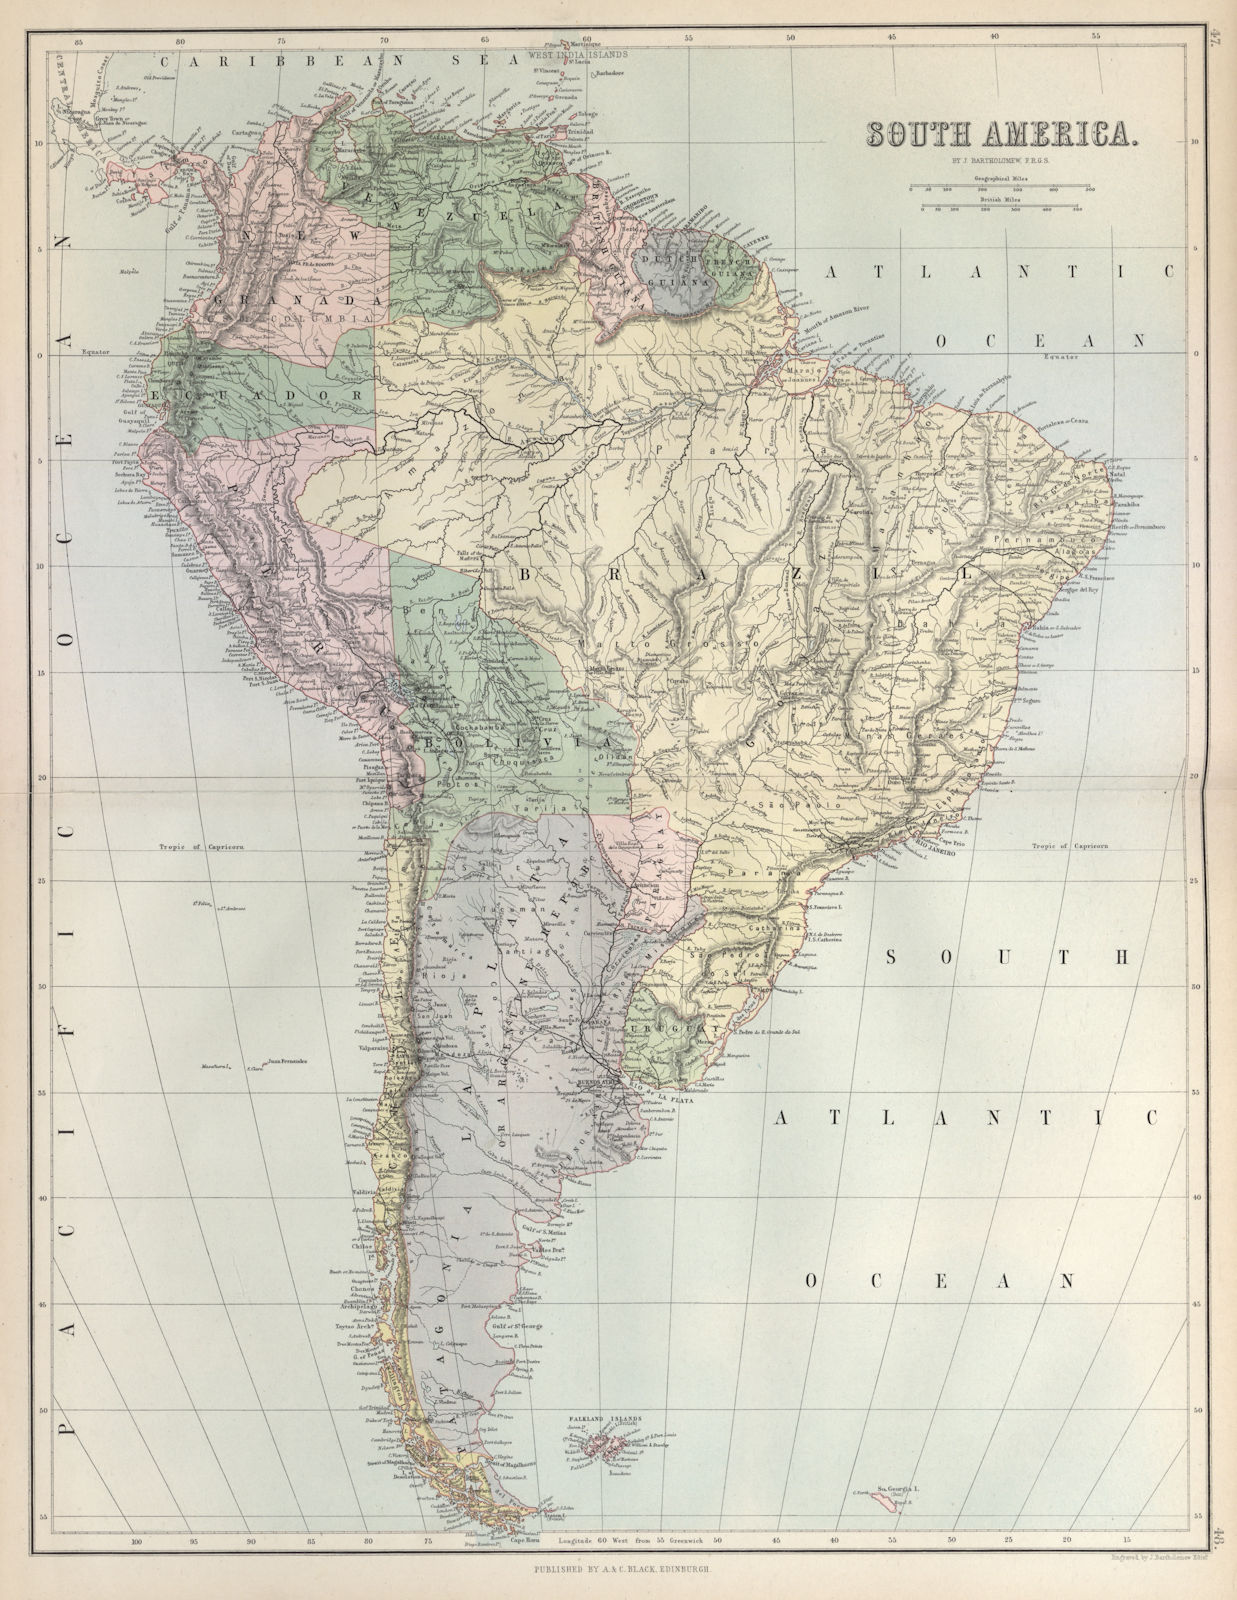 Associate Product South America. Bolivia w/ Litoral pre War of the Pacific. BARTHOLOMEW 1882 map